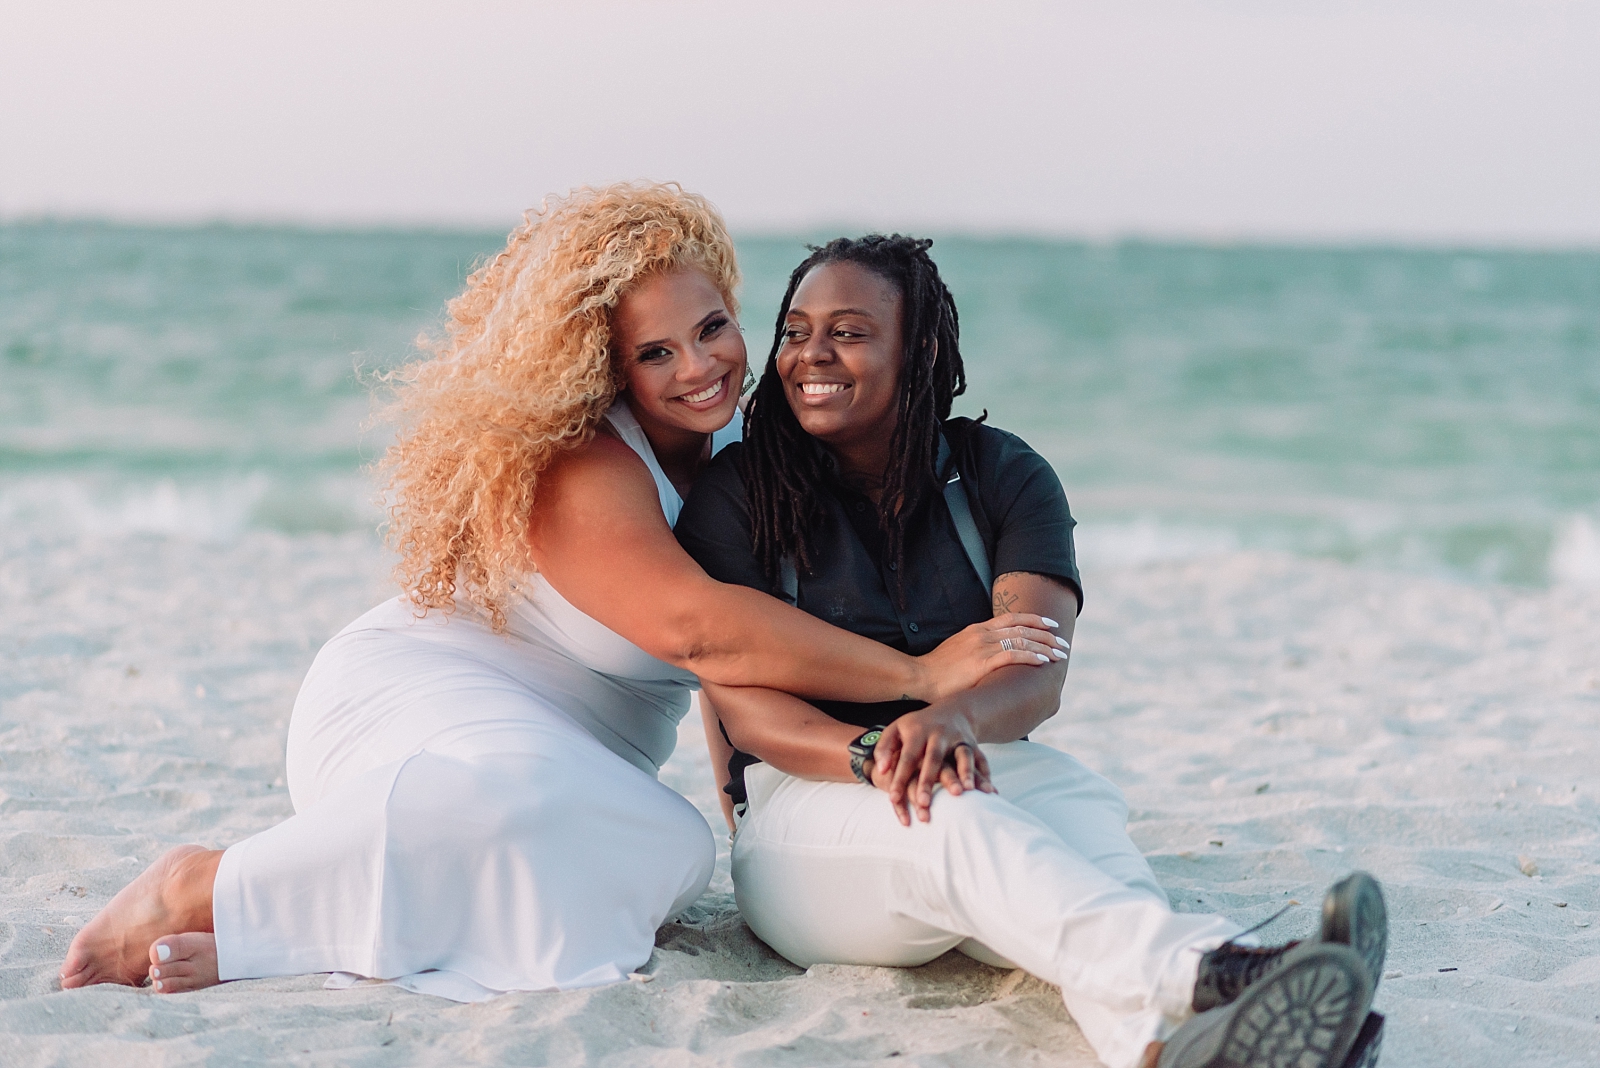 Black Lesbian engagements on Sanibel Island. Same-sex couple celebrates with champagne toasts on the beach in Florida.